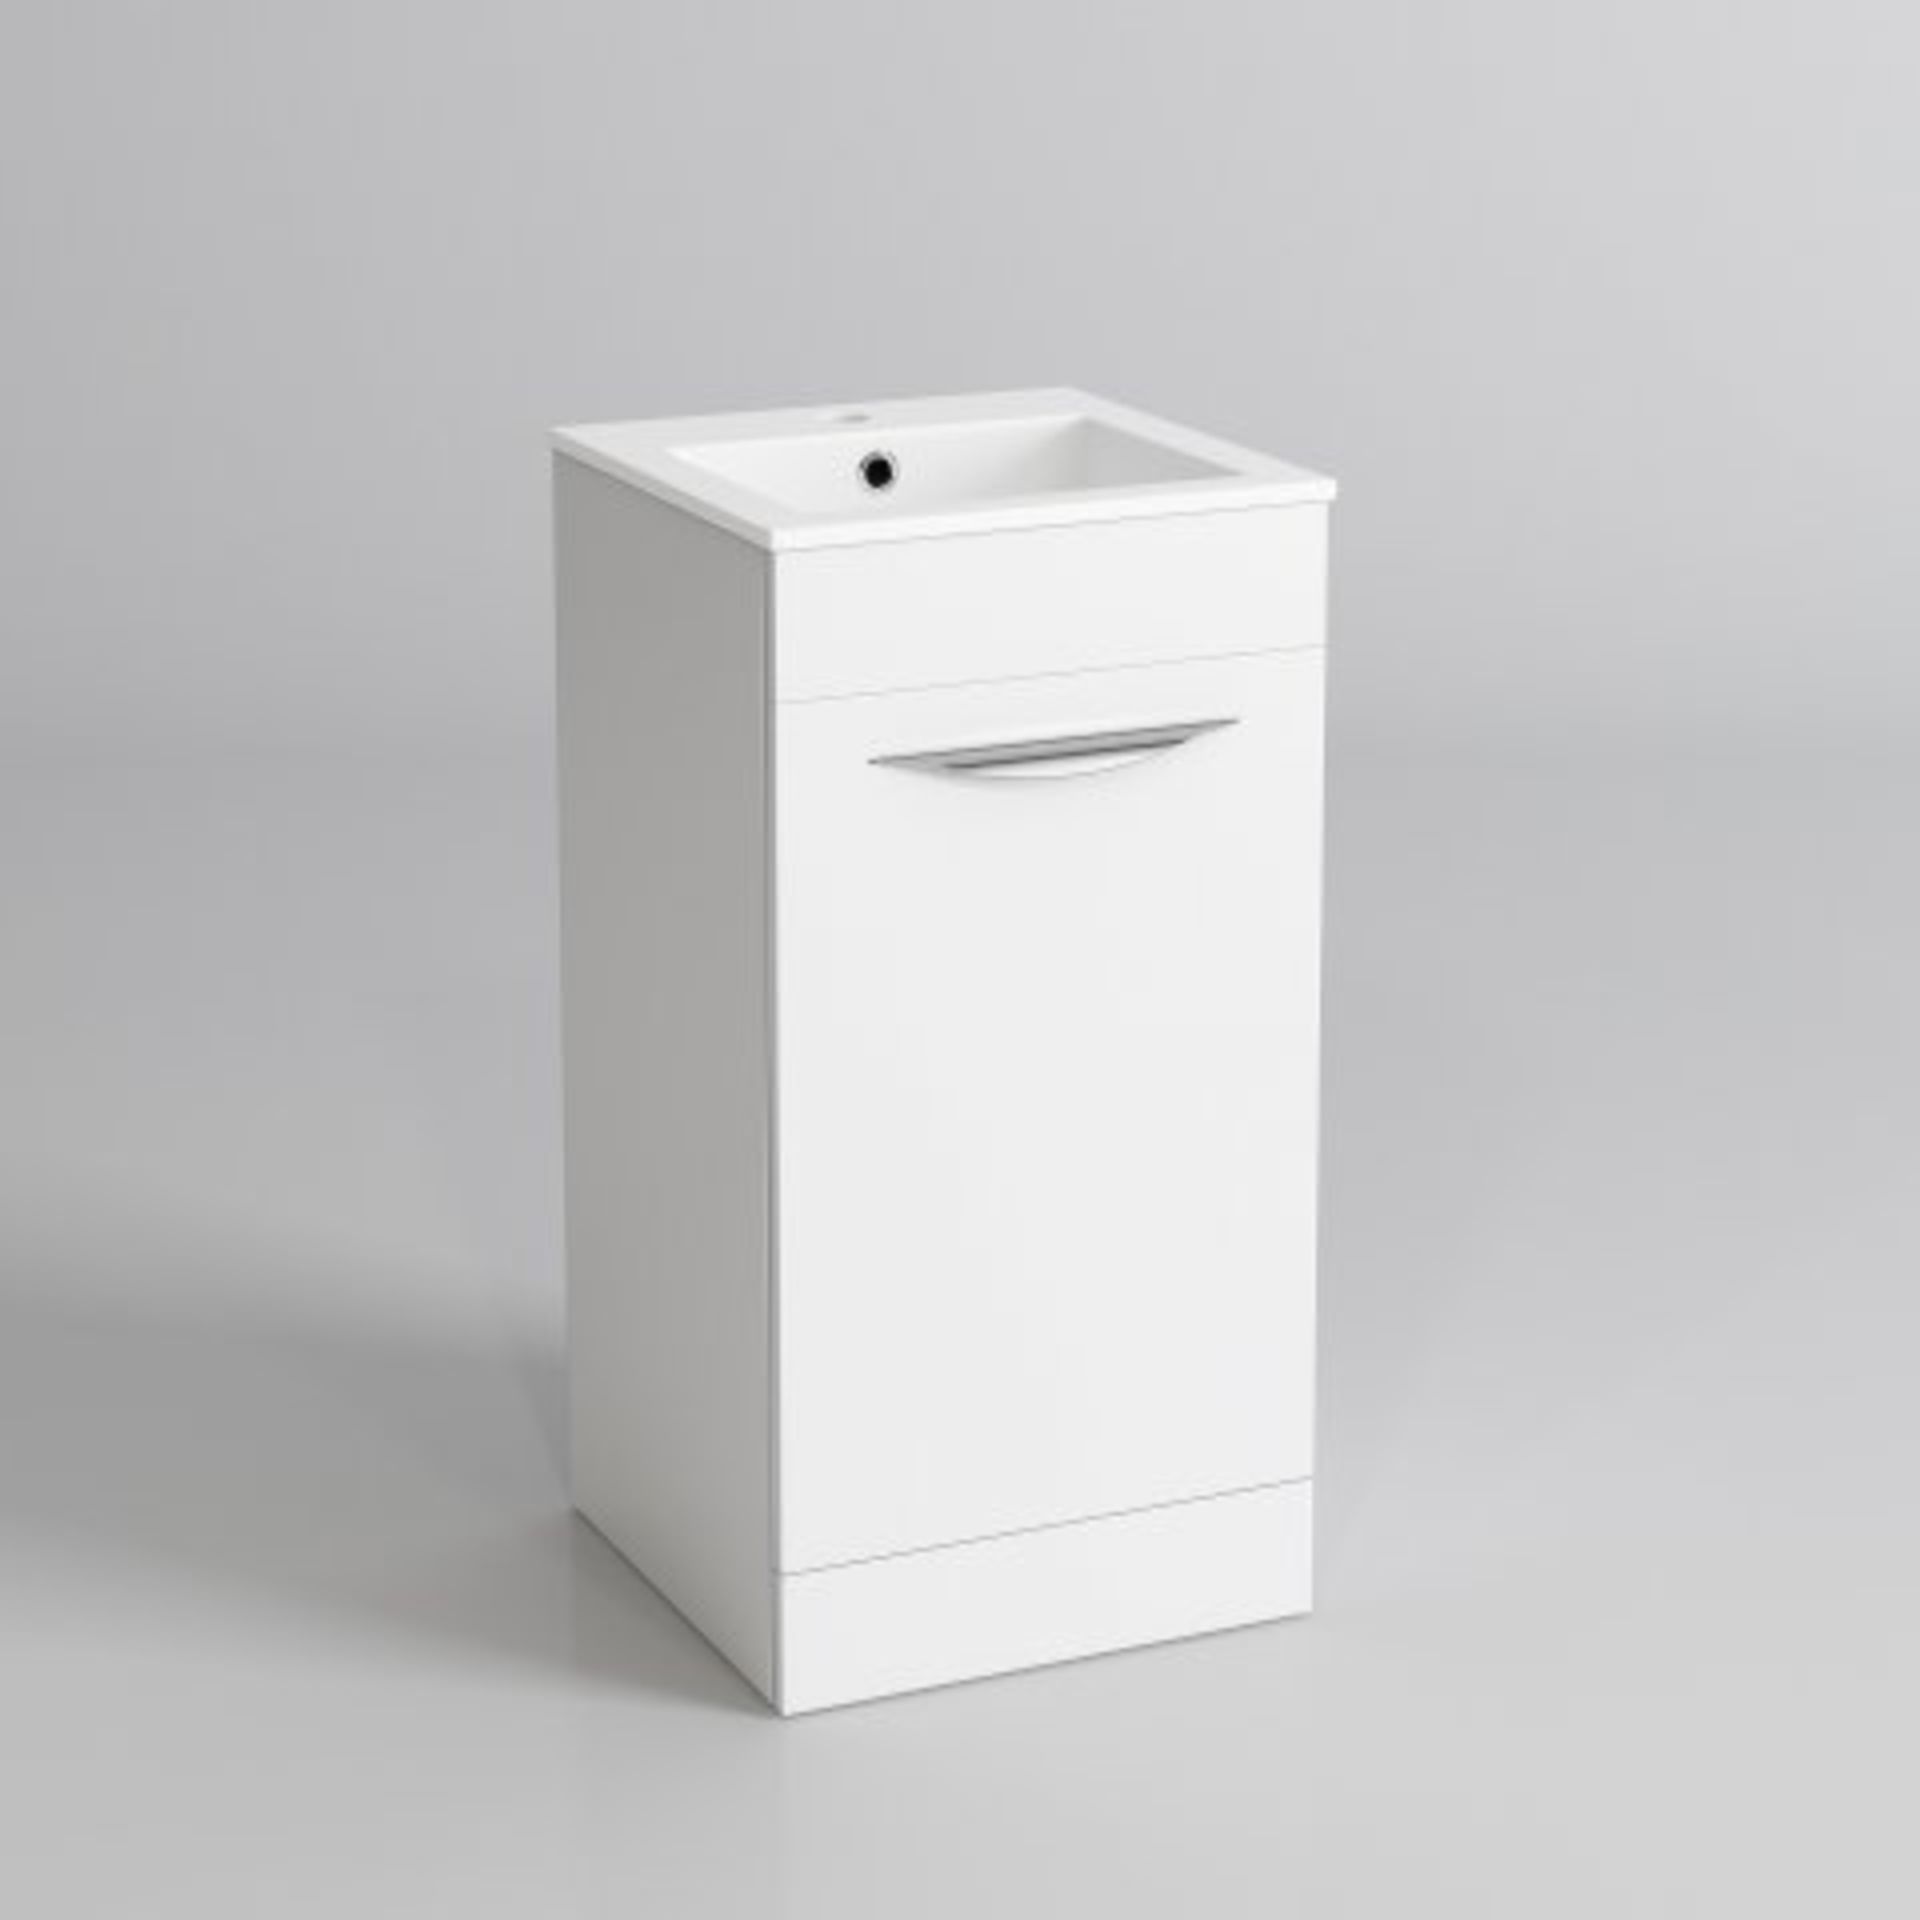 (I60) 400mm Severn High Gloss White Cloakroom Basin Cabinet - Floor Standing. RRP £212.99. COMES - Bild 4 aus 4